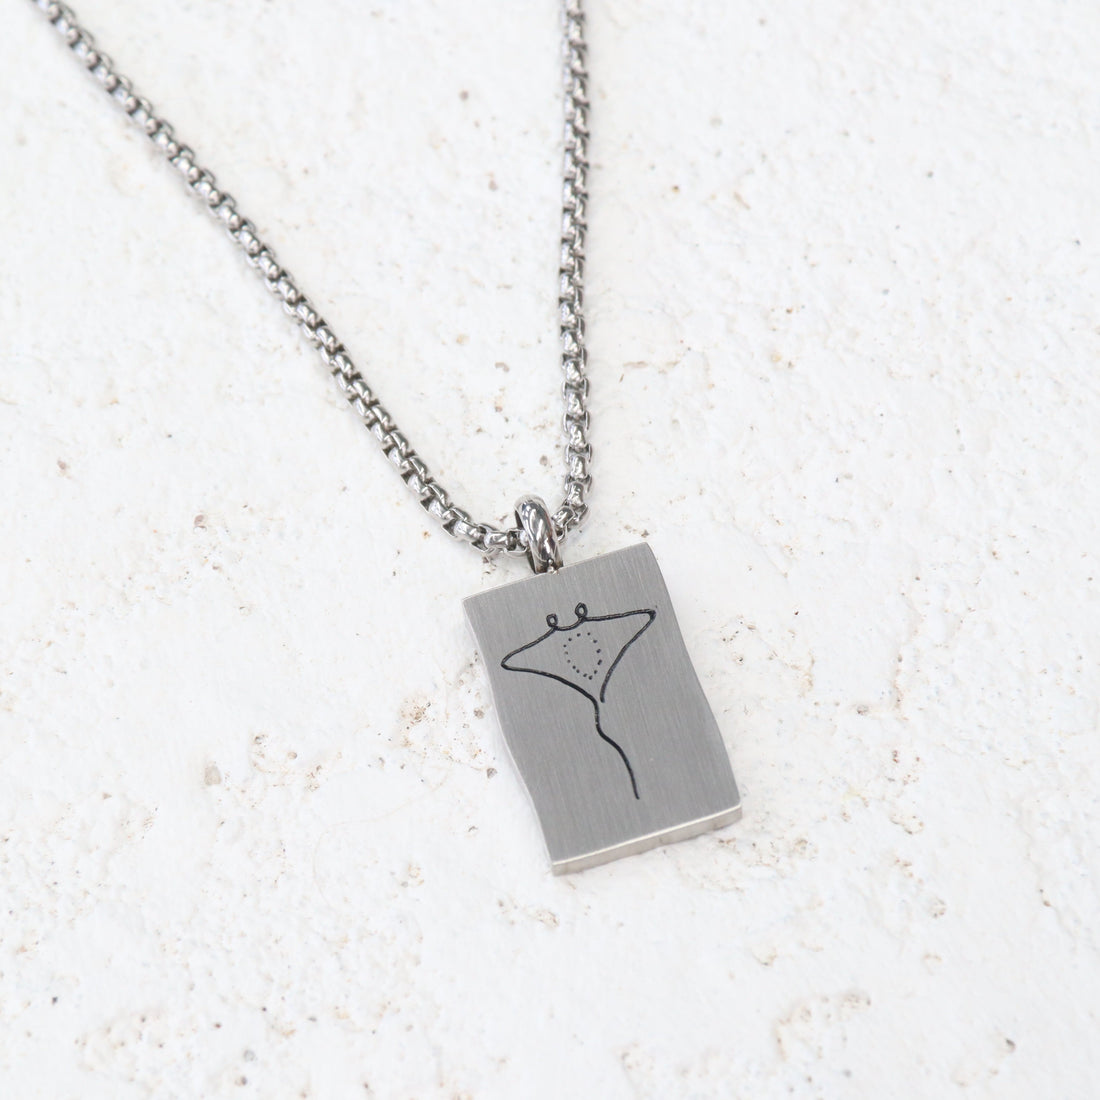 Manta Ray Stainless Steel Pendant Necklace